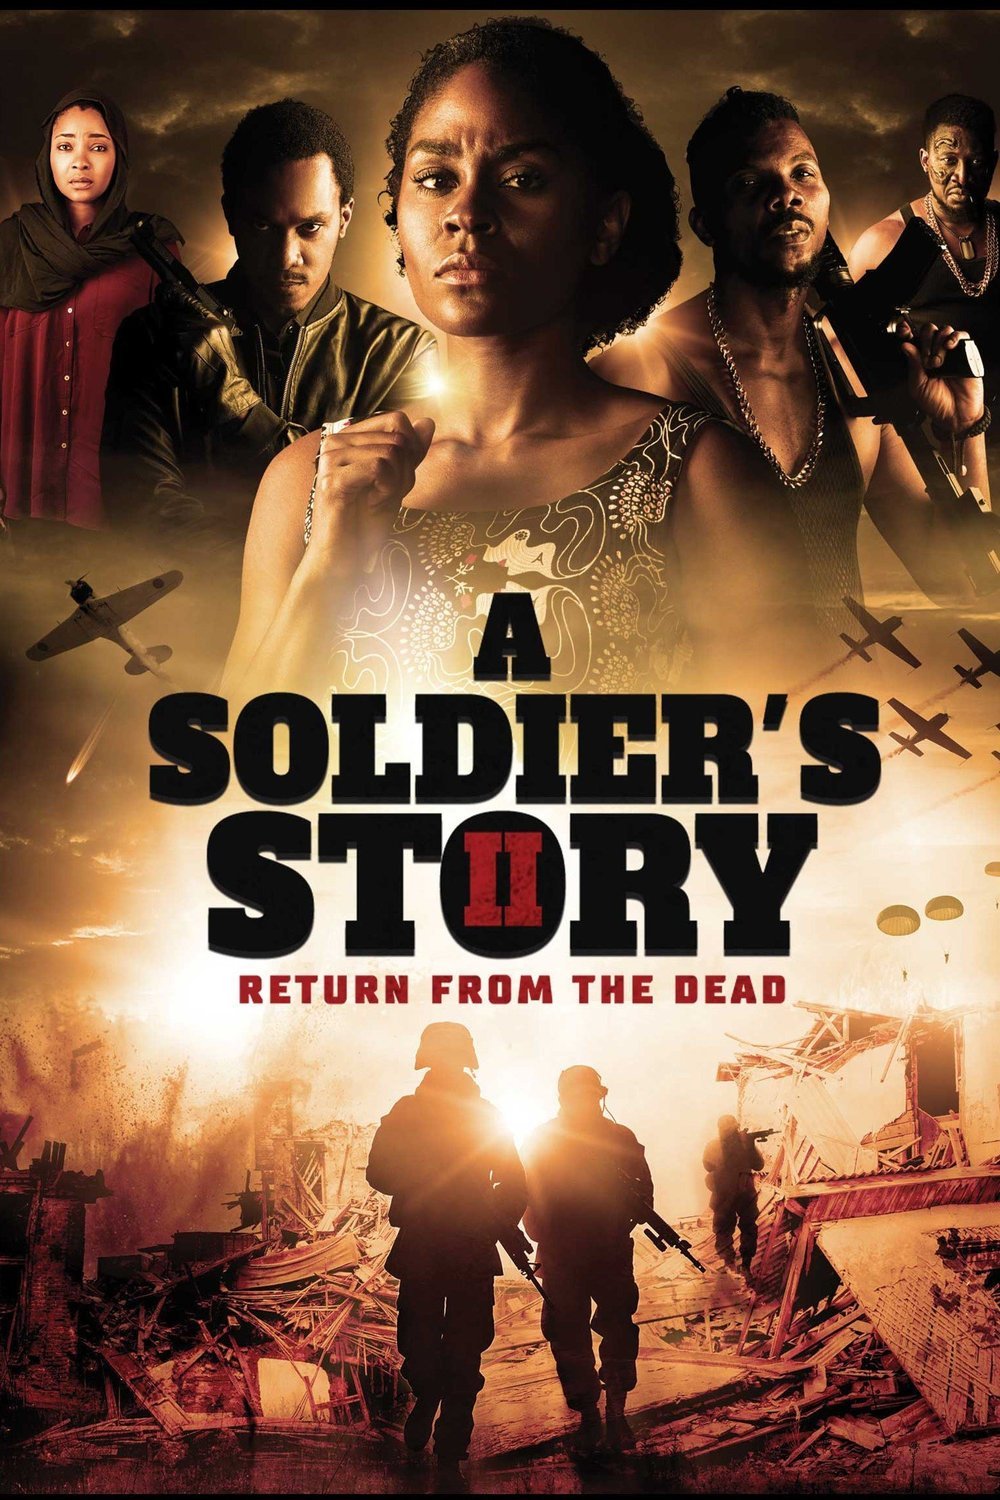 Poster of the movie A Soldier's Story 2: Return from the Dead